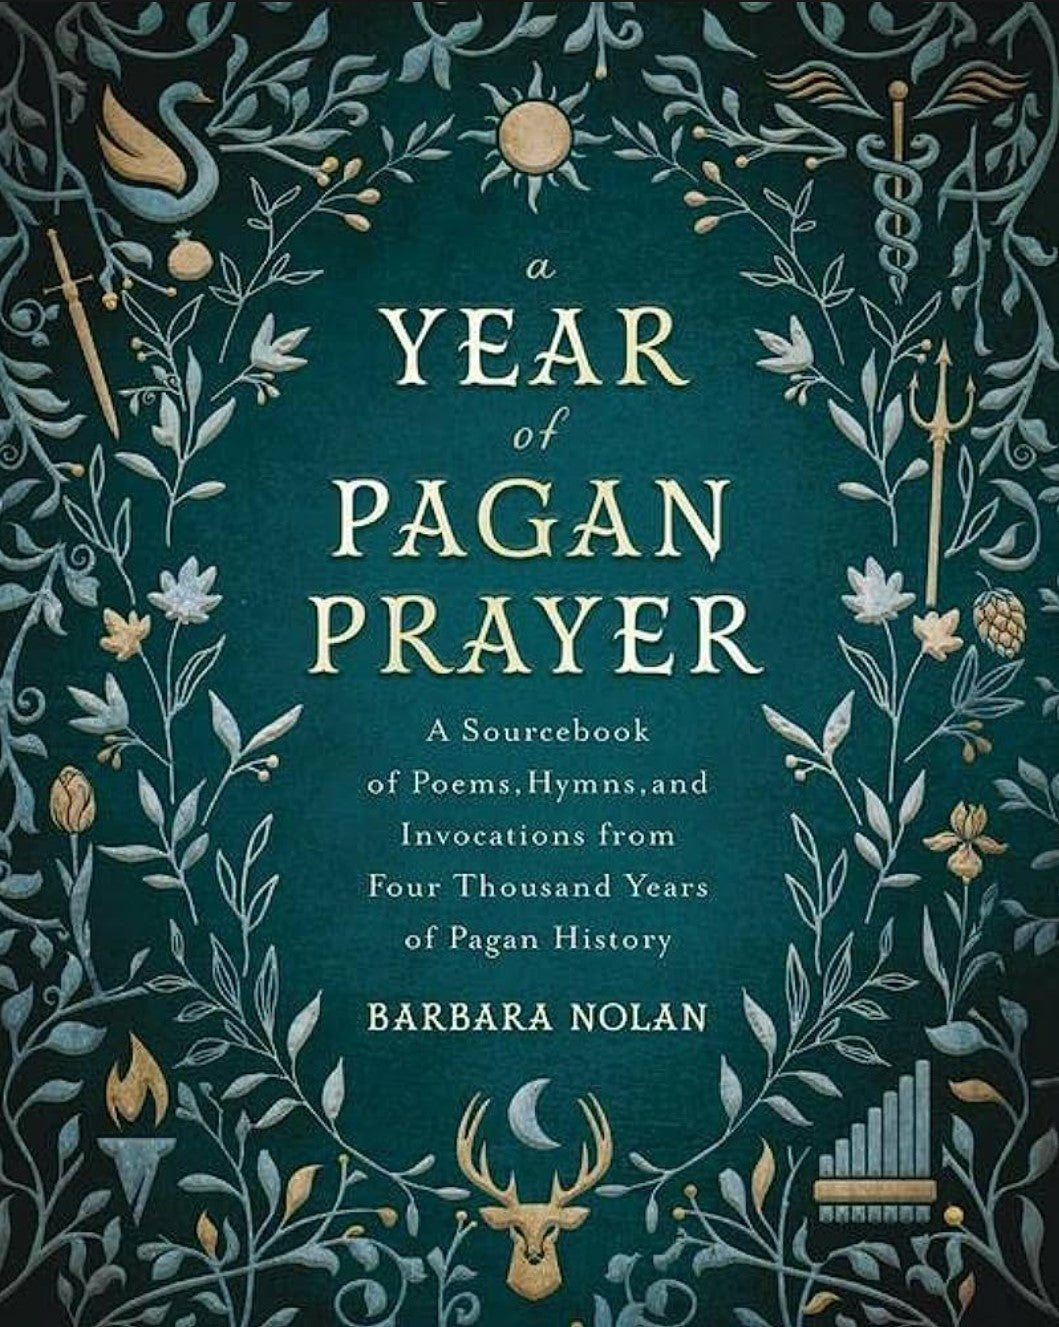 A Year of Pagan Prayer; A Sourcebook of Poems, Hymns, and Invocations from Four Thousand Years of Pagan History